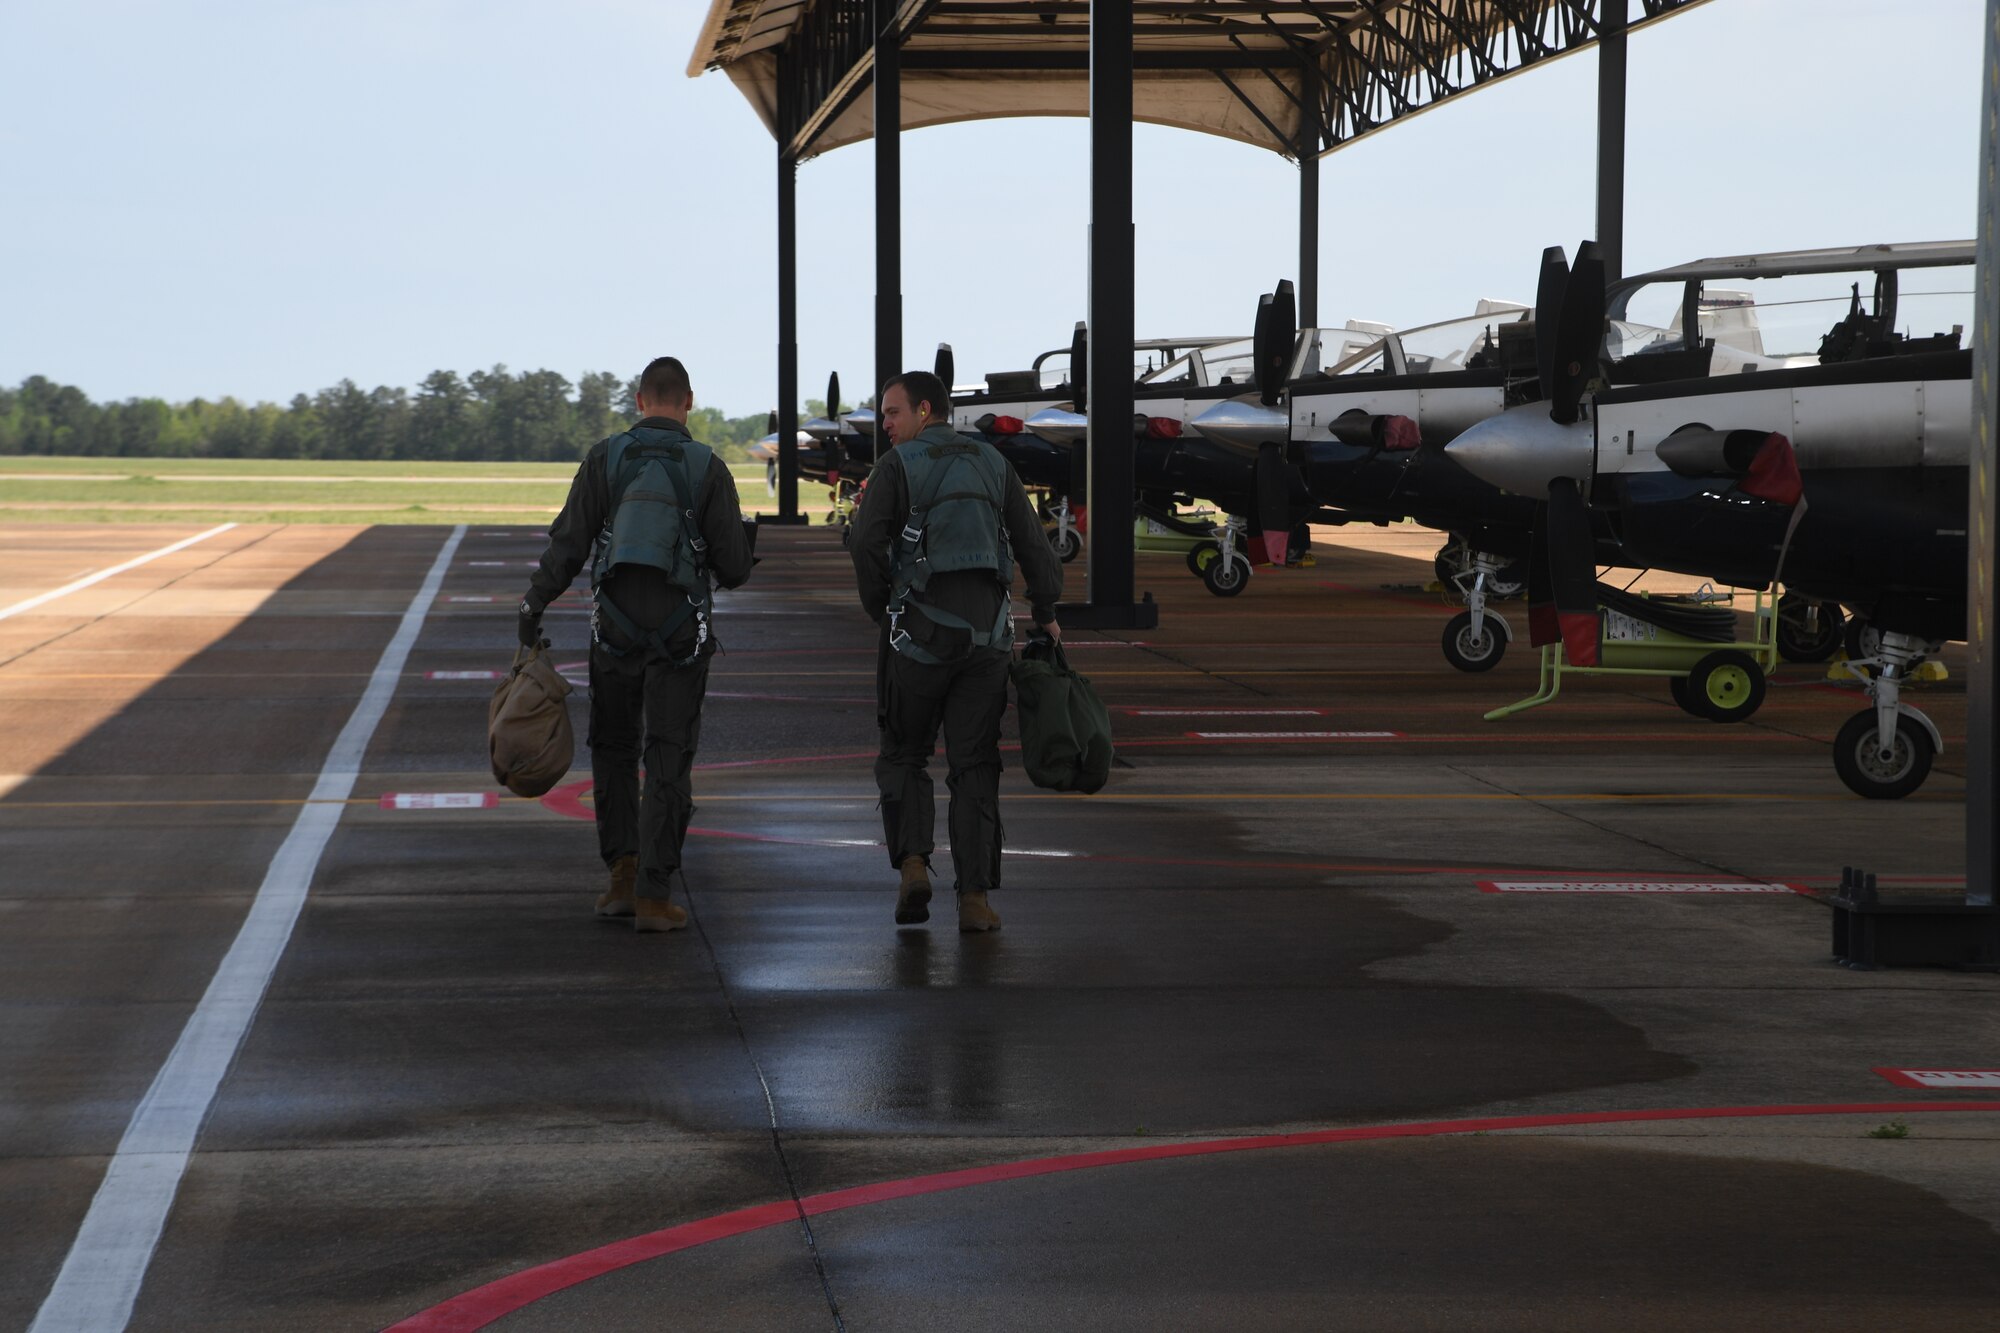 Maj. Bryan Presler steps out with his pilot to receive an orientation flight in a T-6 Texan